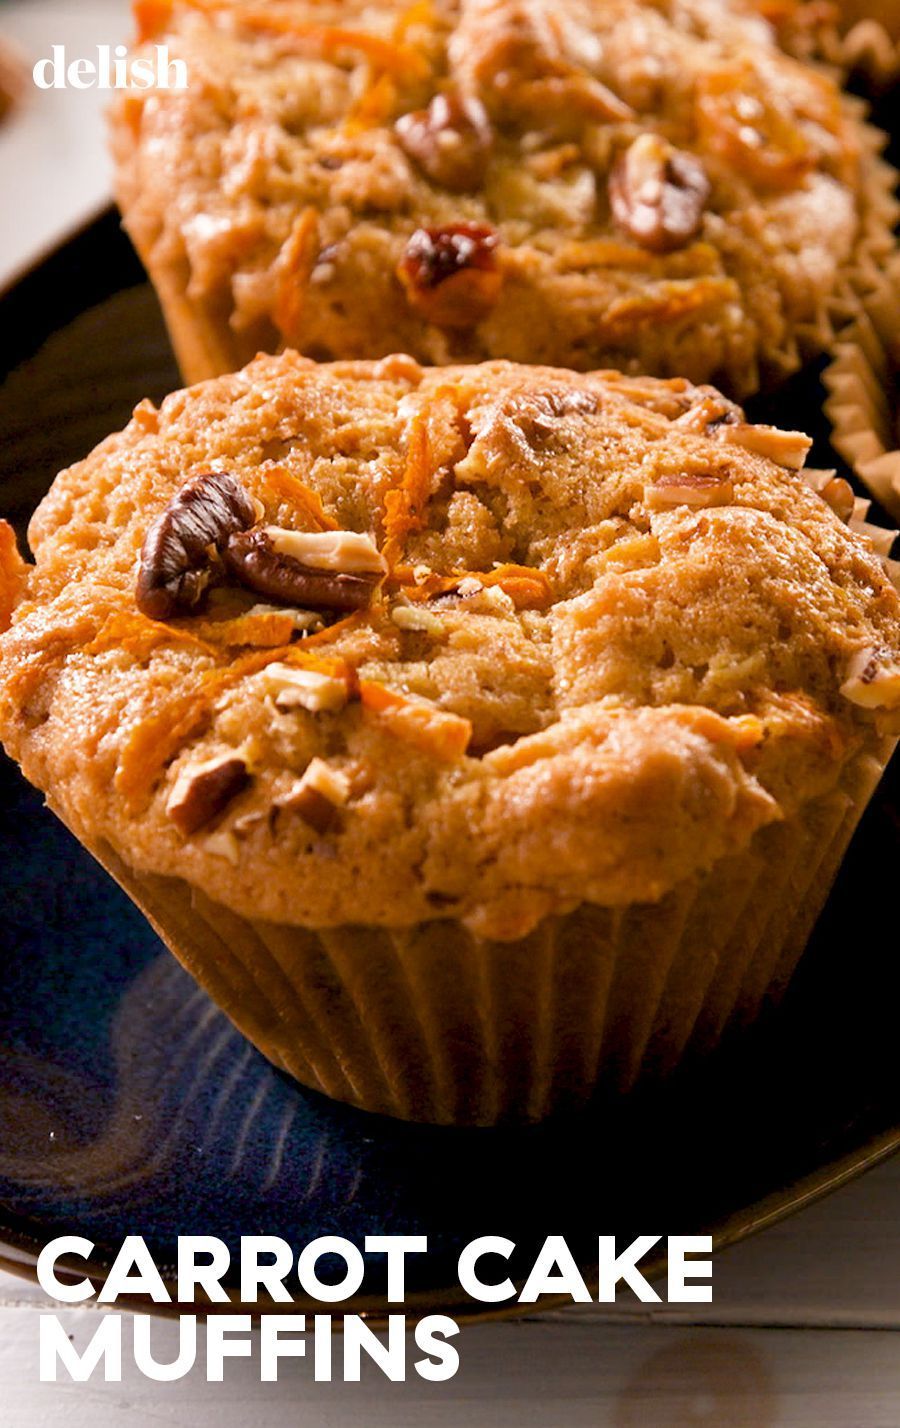 Carrot Cake Muffins Are Your Excuse To Eat Carrot Cake For Breakfast -   19 cake Carrot breakfast ideas